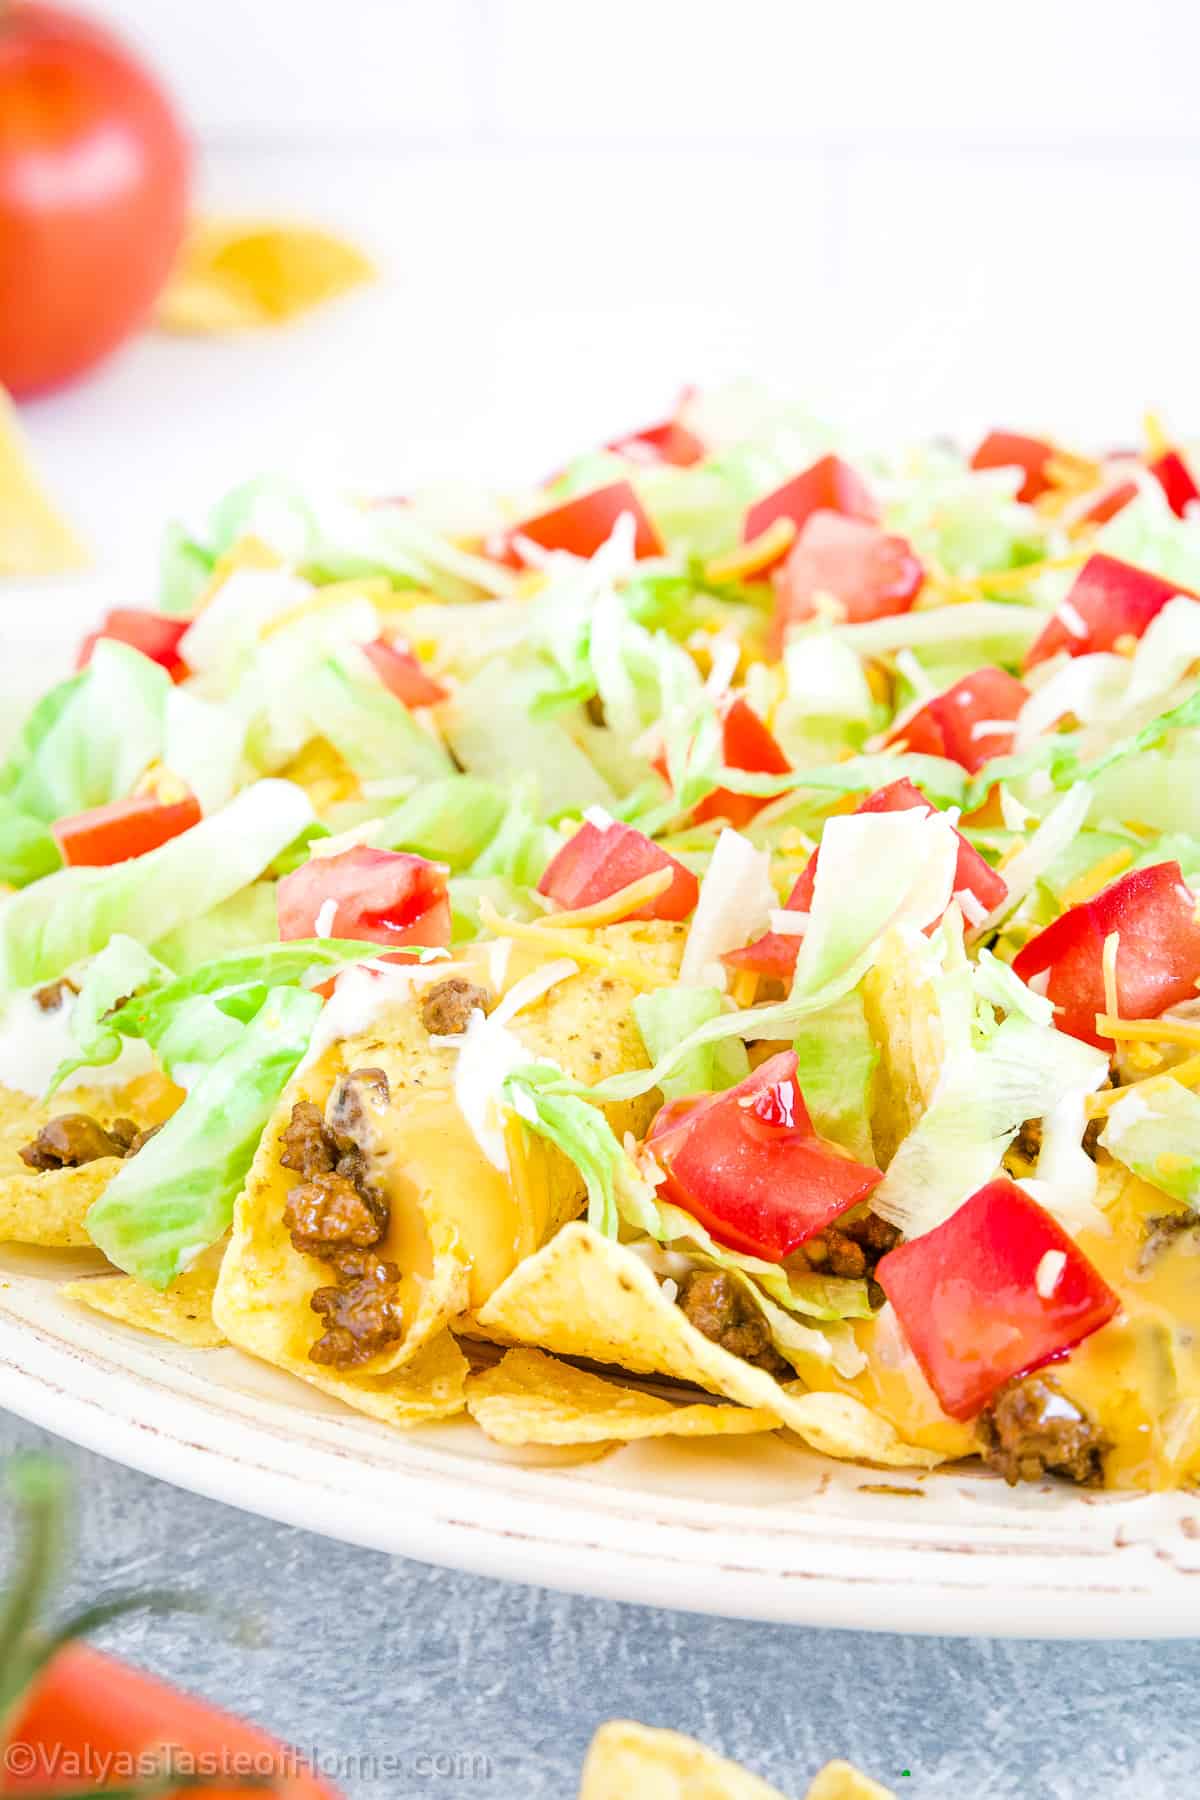 This Nacho Salad recipe is perfect for you if you’re looking for a delicious and satisfying dish that combines the bold flavors of nachos with the freshness of a salad.